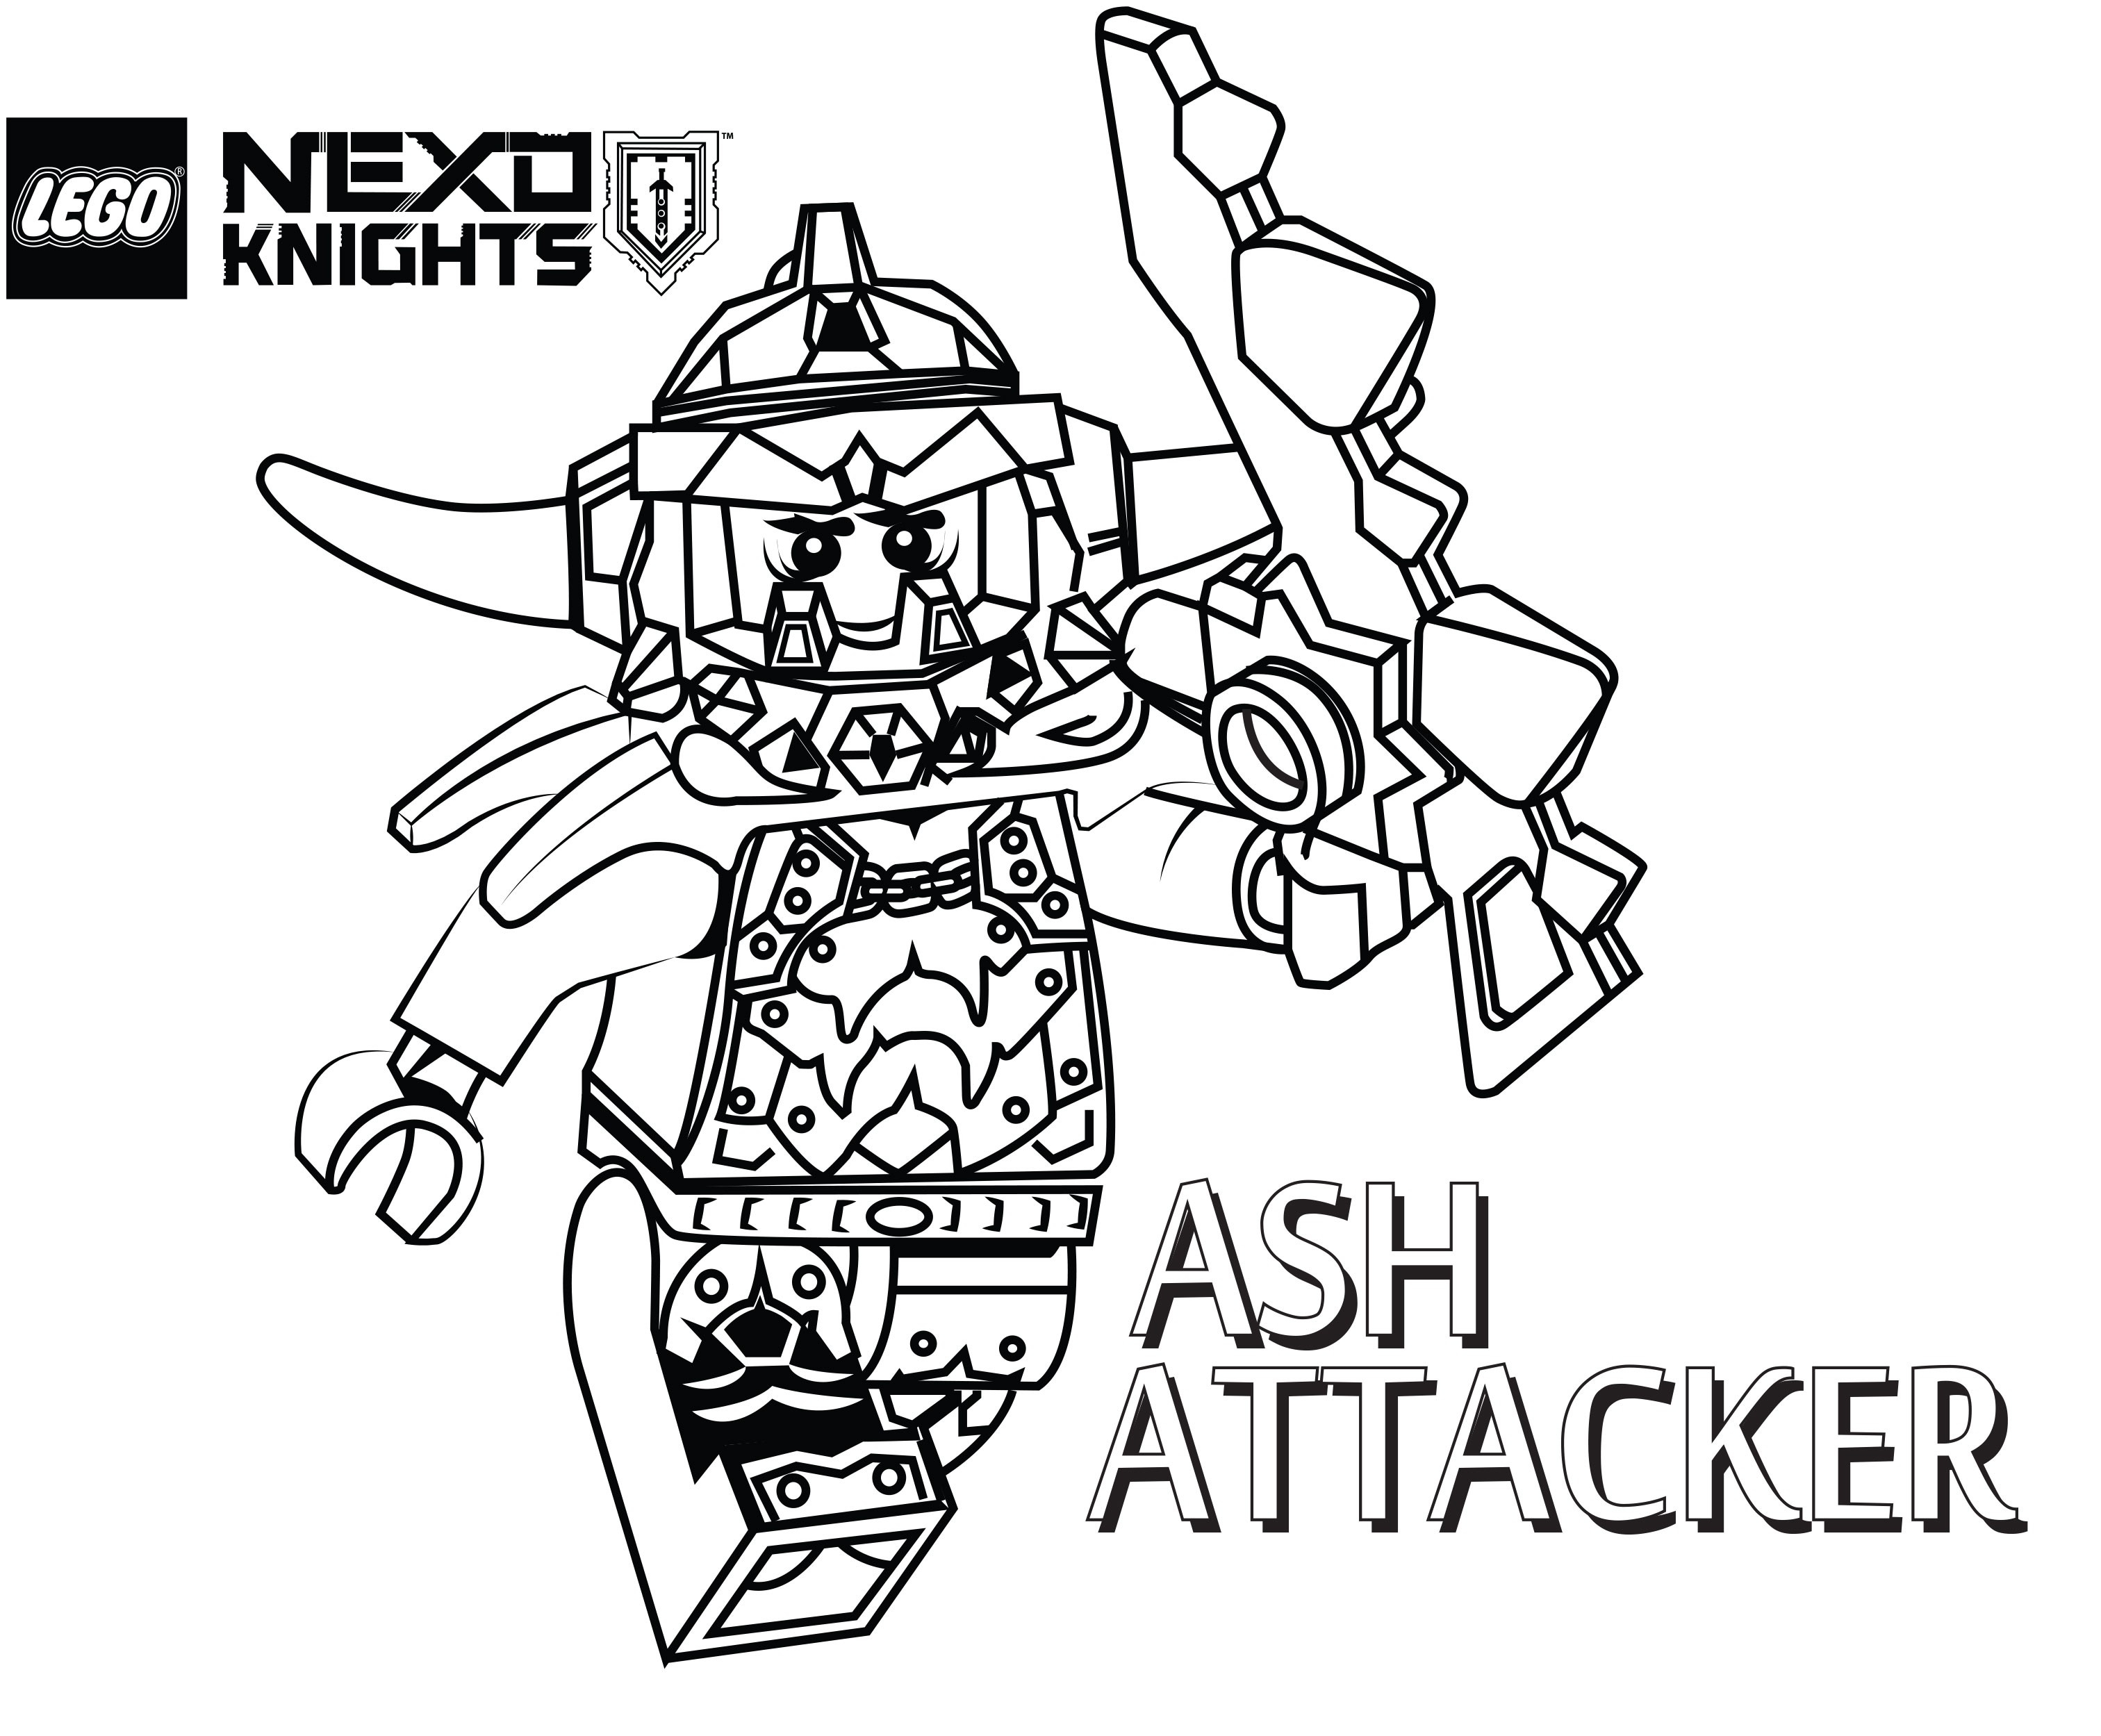 Nexo Knights Coloring Pages Coloring Book Ideas Nexo Knights Coloring Pages Spotlight Knight